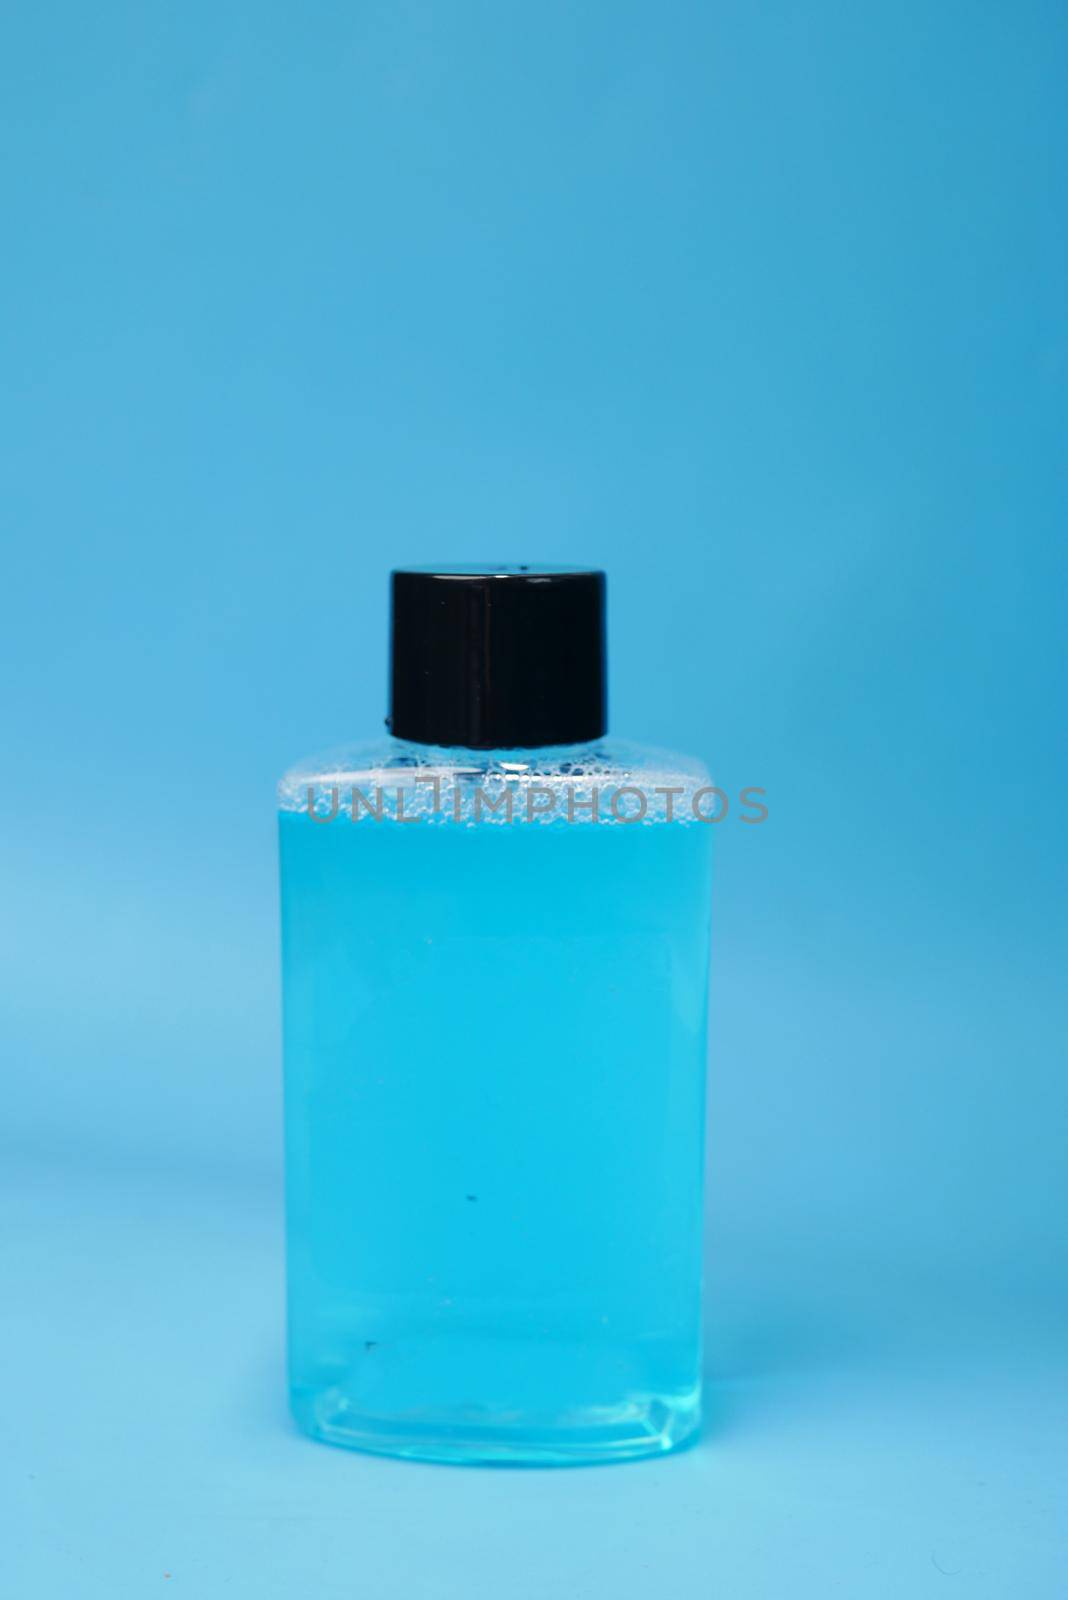 mouthwash liquid in a container on blue background by towfiq007